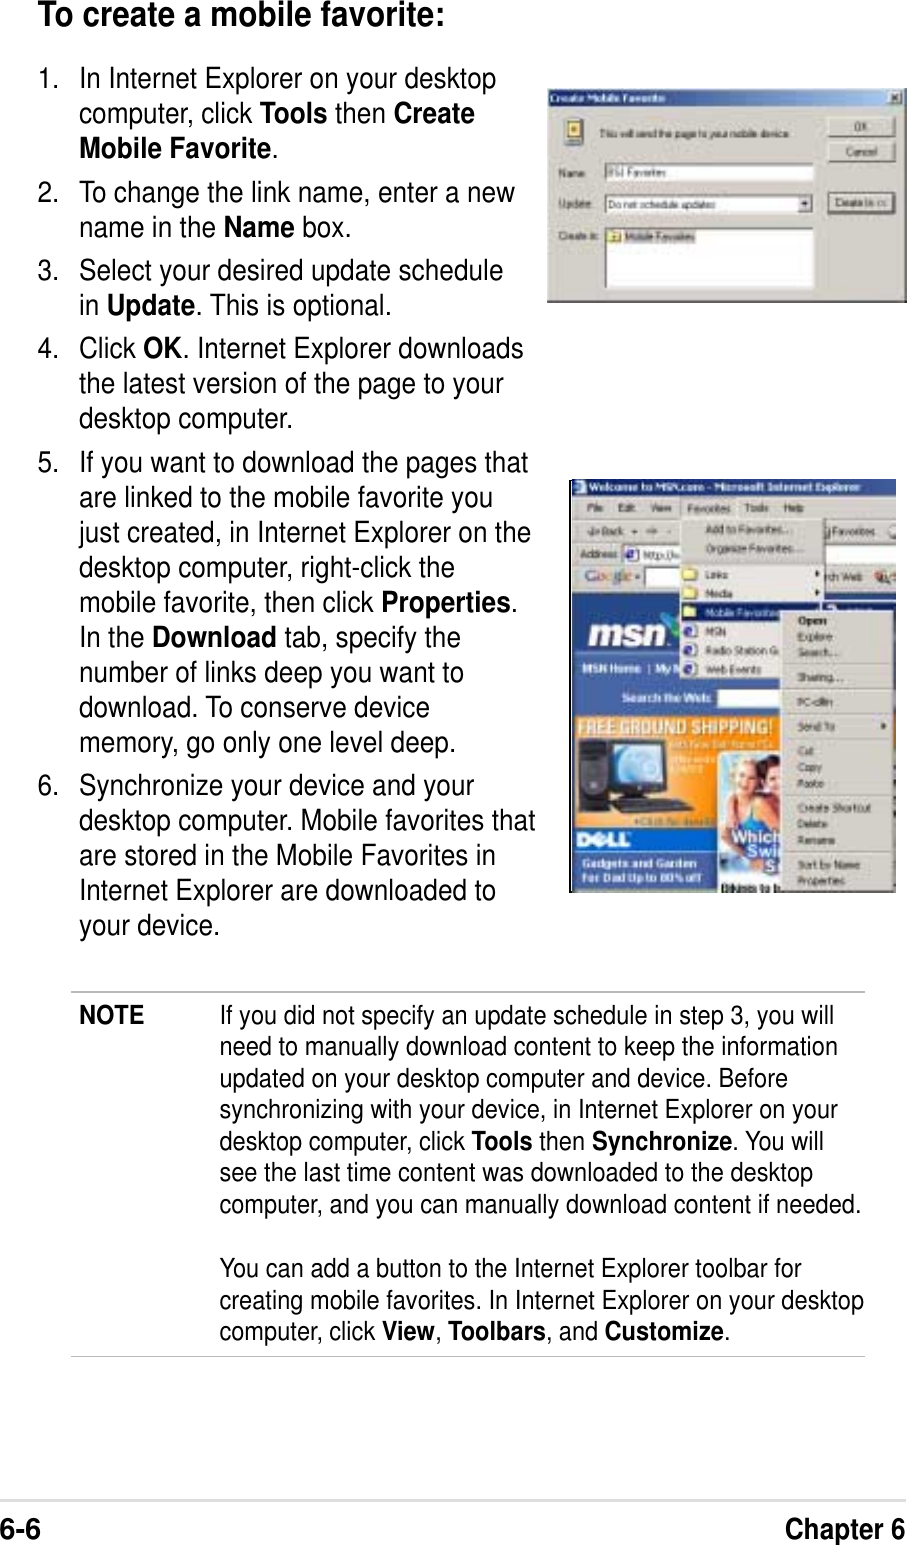 6-6Chapter 6To create a mobile favorite:1. In Internet Explorer on your desktopcomputer, click Tools then CreateMobile Favorite.2. To change the link name, enter a newname in the Name box.3. Select your desired update schedulein Update. This is optional.4. Click OK. Internet Explorer downloadsthe latest version of the page to yourdesktop computer.5. If you want to download the pages thatare linked to the mobile favorite youjust created, in Internet Explorer on thedesktop computer, right-click themobile favorite, then click Properties.In the Download tab, specify thenumber of links deep you want todownload. To conserve devicememory, go only one level deep.6. Synchronize your device and yourdesktop computer. Mobile favorites thatare stored in the Mobile Favorites inInternet Explorer are downloaded toyour device.NOTE If you did not specify an update schedule in step 3, you willneed to manually download content to keep the informationupdated on your desktop computer and device. Beforesynchronizing with your device, in Internet Explorer on yourdesktop computer, click Tools then Synchronize. You willsee the last time content was downloaded to the desktopcomputer, and you can manually download content if needed.You can add a button to the Internet Explorer toolbar forcreating mobile favorites. In Internet Explorer on your desktopcomputer, click View, Toolbars, and Customize.